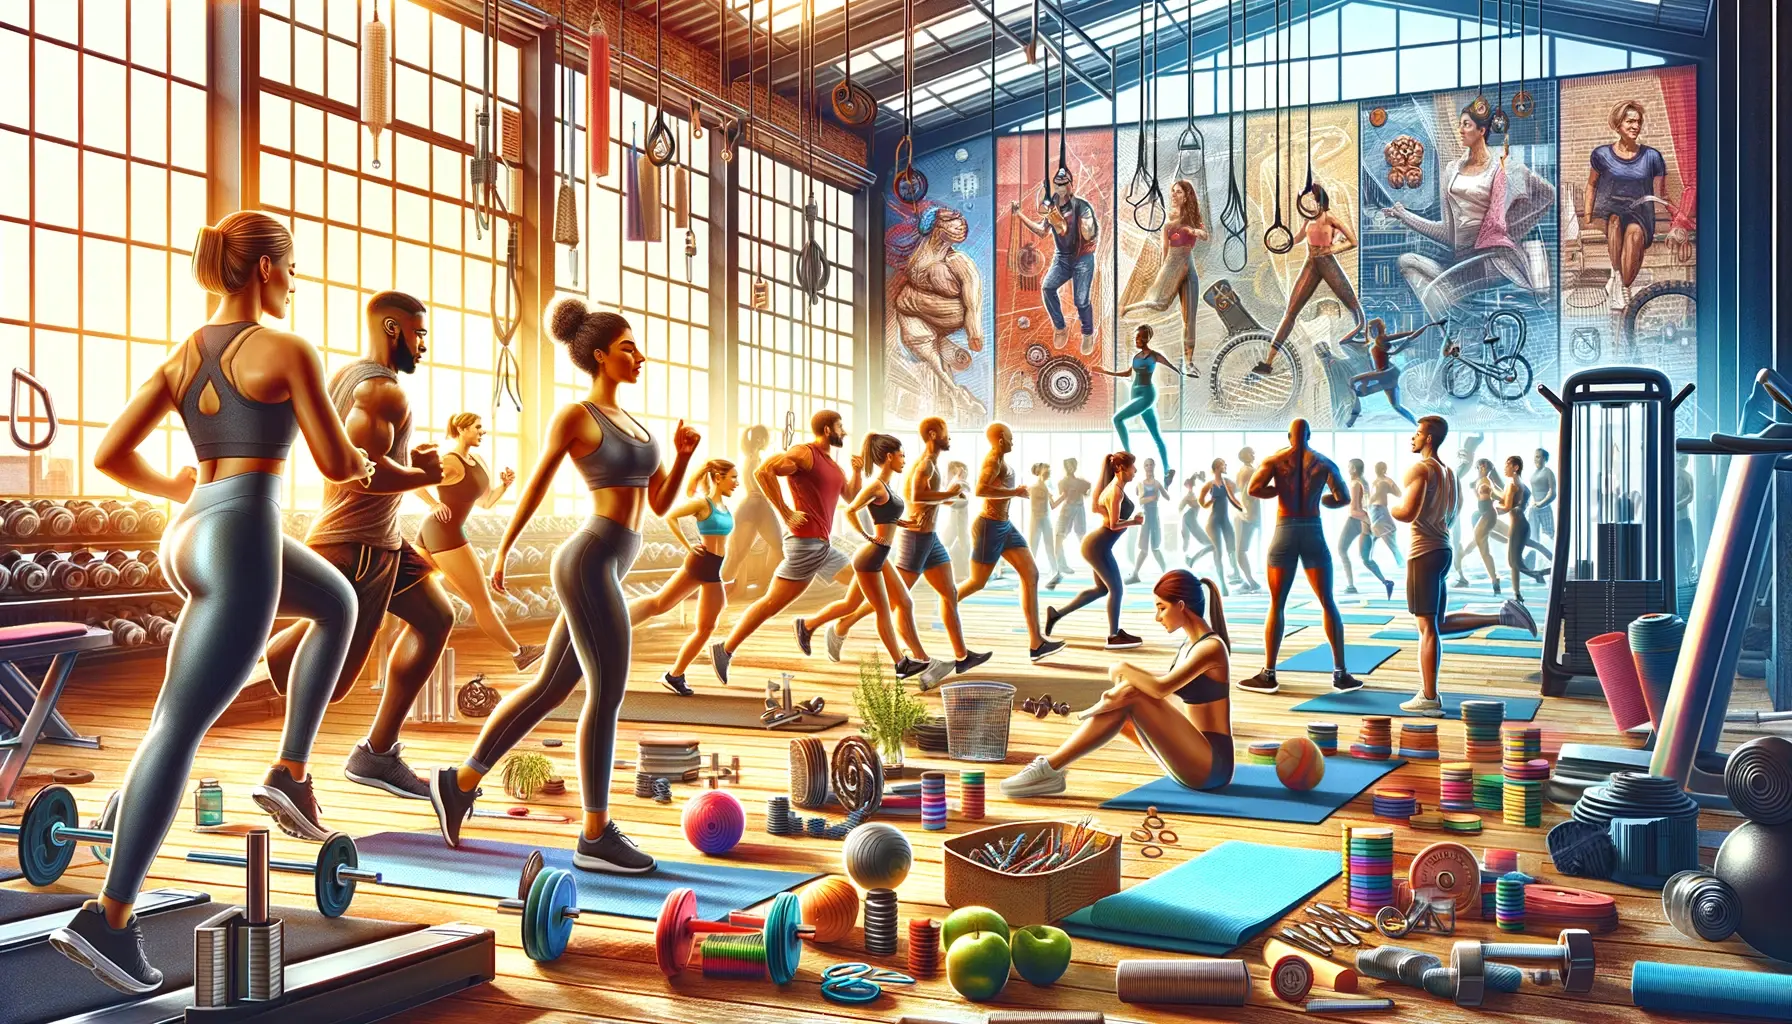 An inspiring fitness blog header image, depicting a diverse group of individuals engaging in various exercises such as running, yoga, and strength training to reduce inner thigh fat